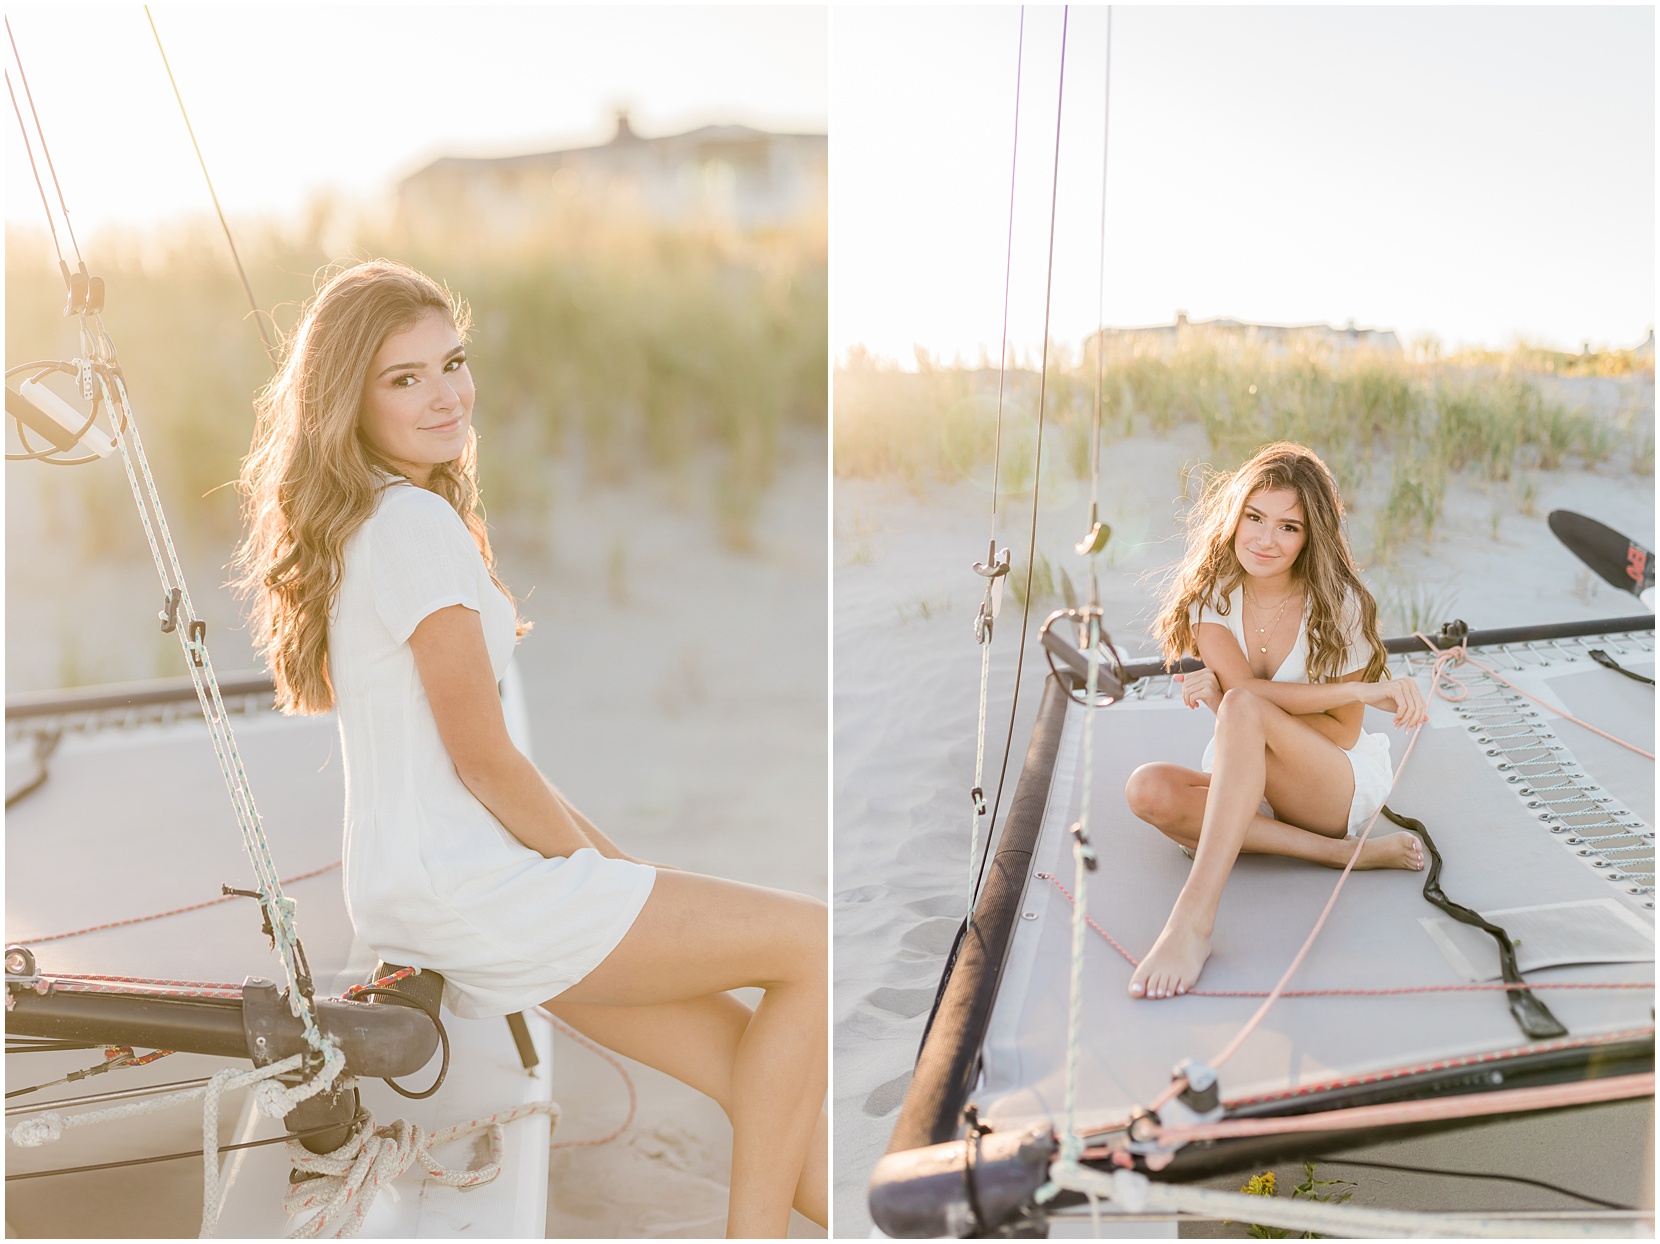 high school senior posing for senior pictures on the beach in ocean city new jersey. she is wearing a white romper and sitting on a sailboat. the sun is golden!